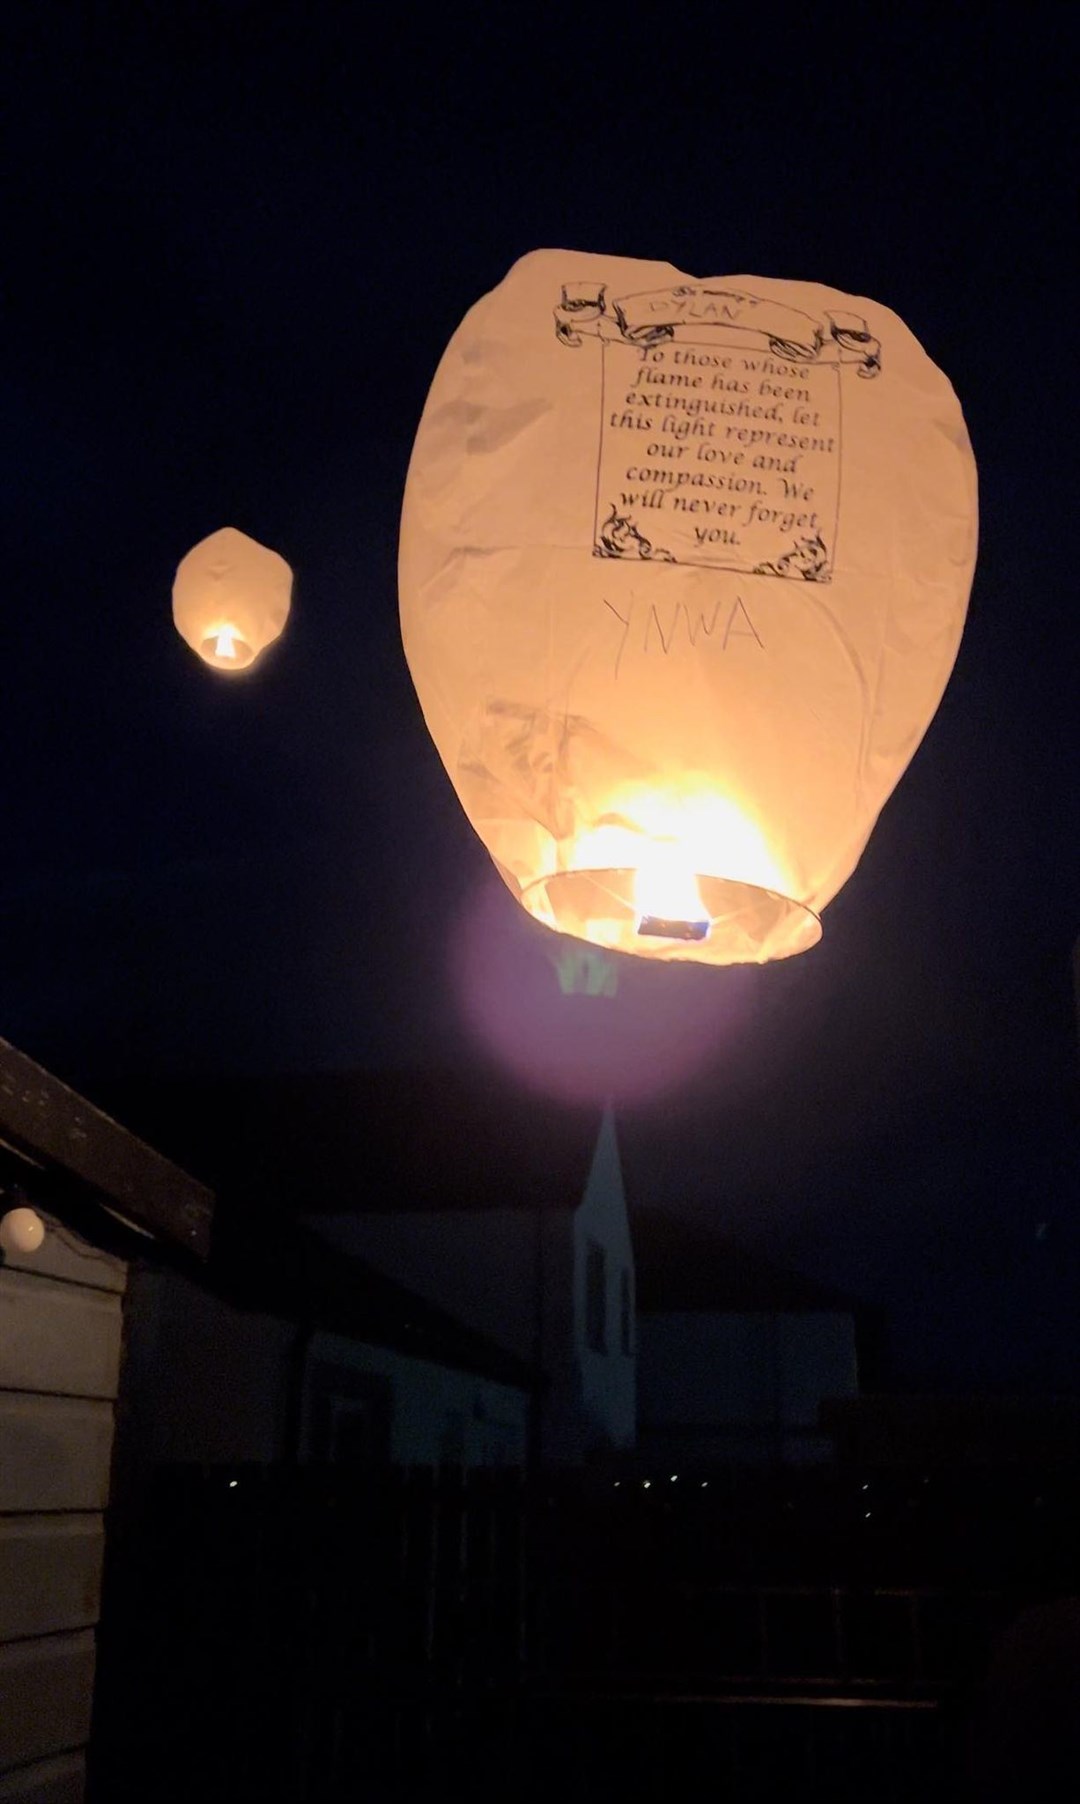 The biodegradable lanterns lit up the night sky and caught the eye of many.